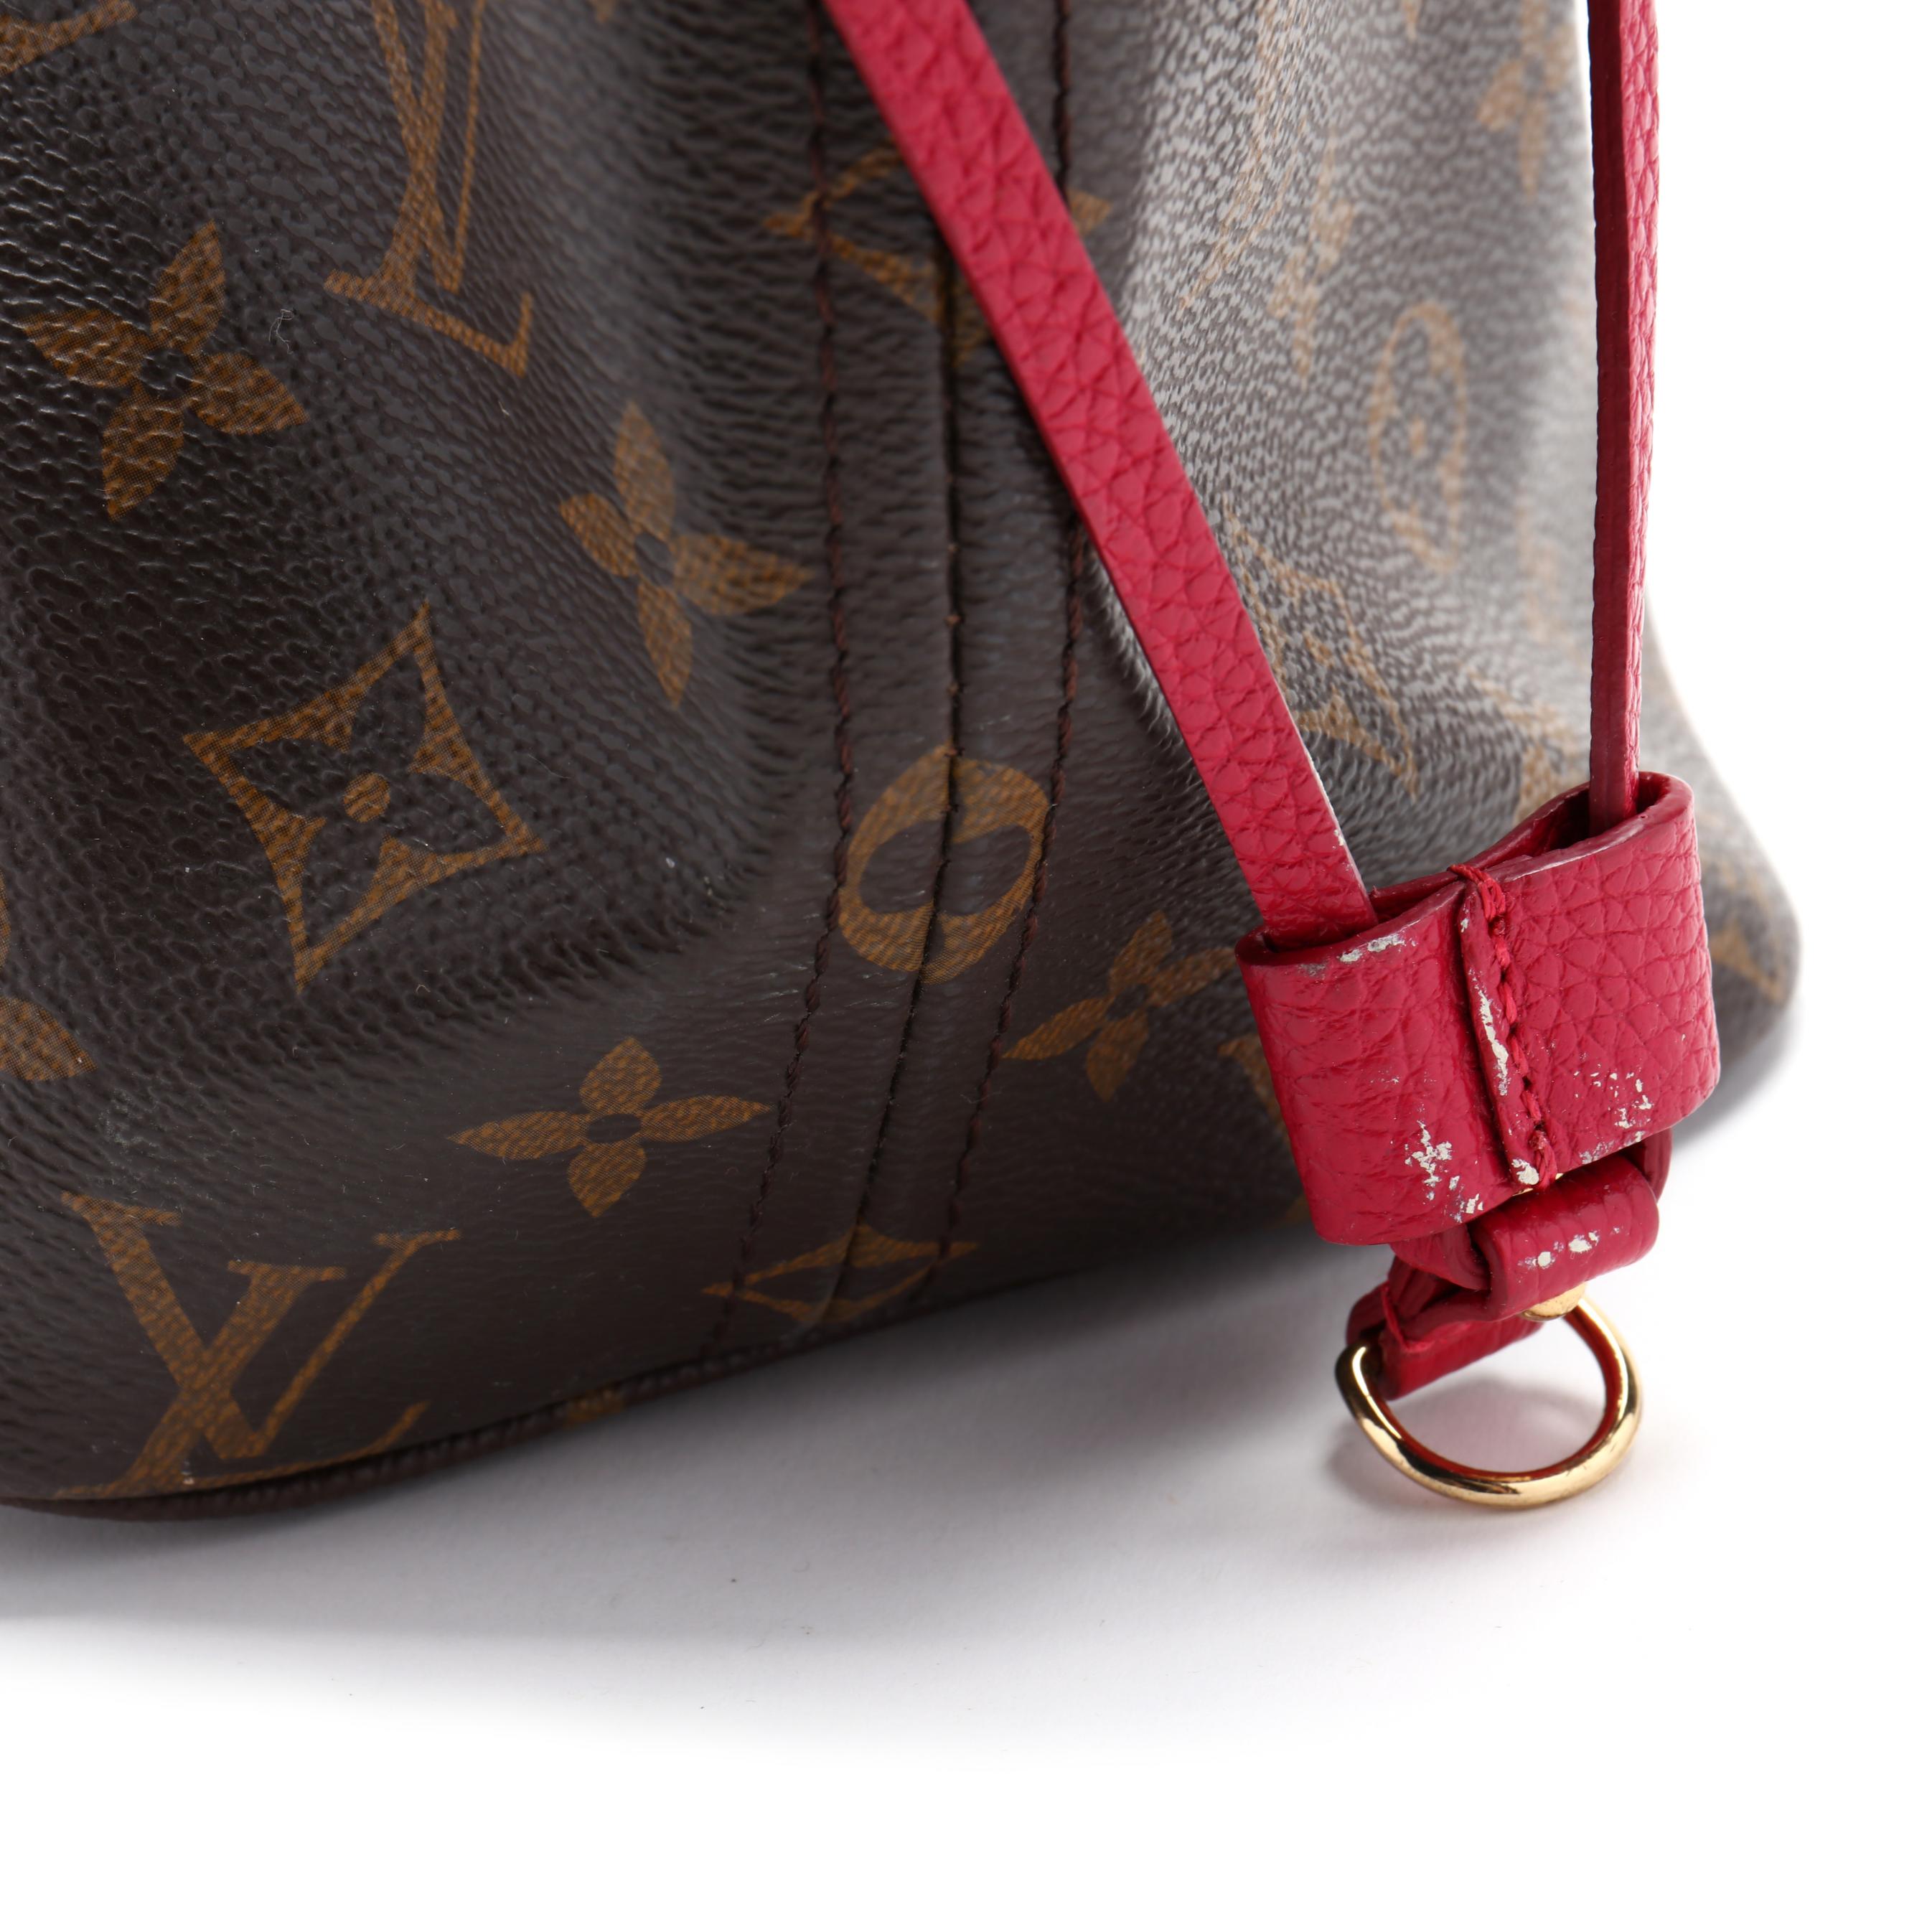 A Limited Edition Neverfull, Monogram Ikat MM Rose Indien, Louis Vuitton  (Lot 133 - The Important Winter AuctionDec 5, 2020, 9:00am)